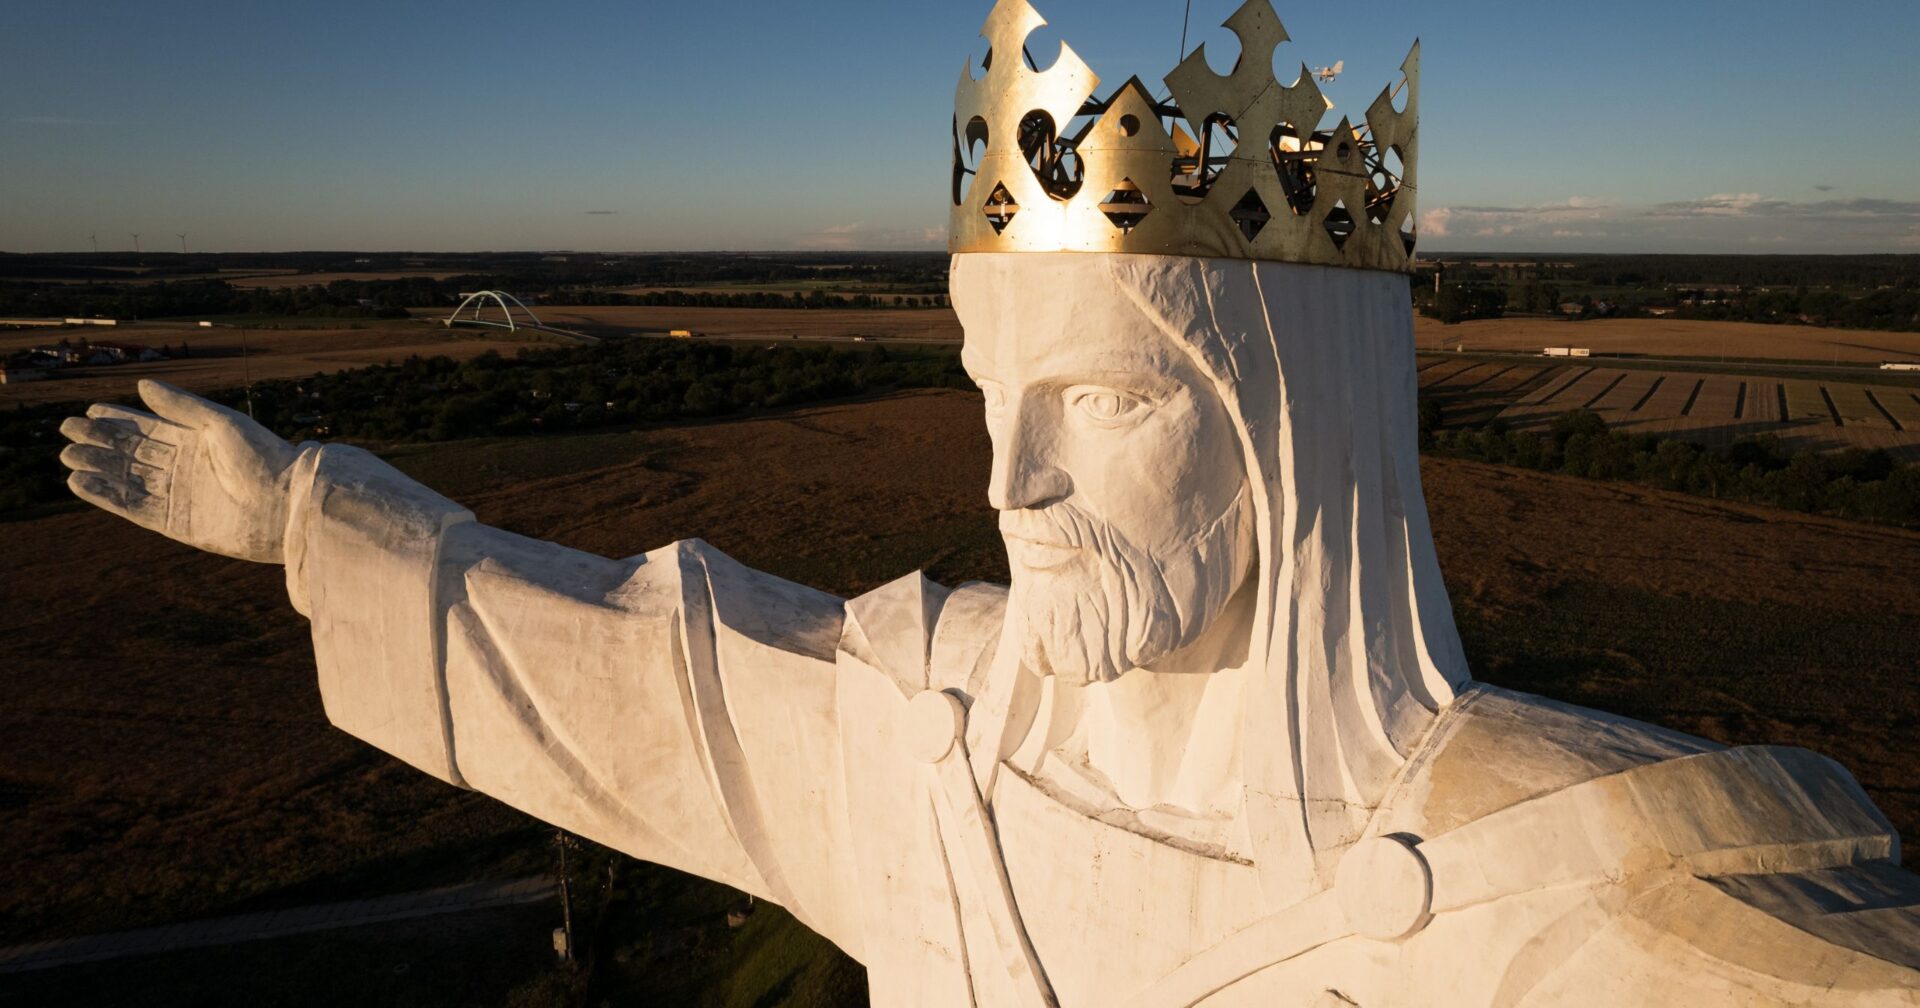 Did You Know? Jesus Is Officially the King of Poland